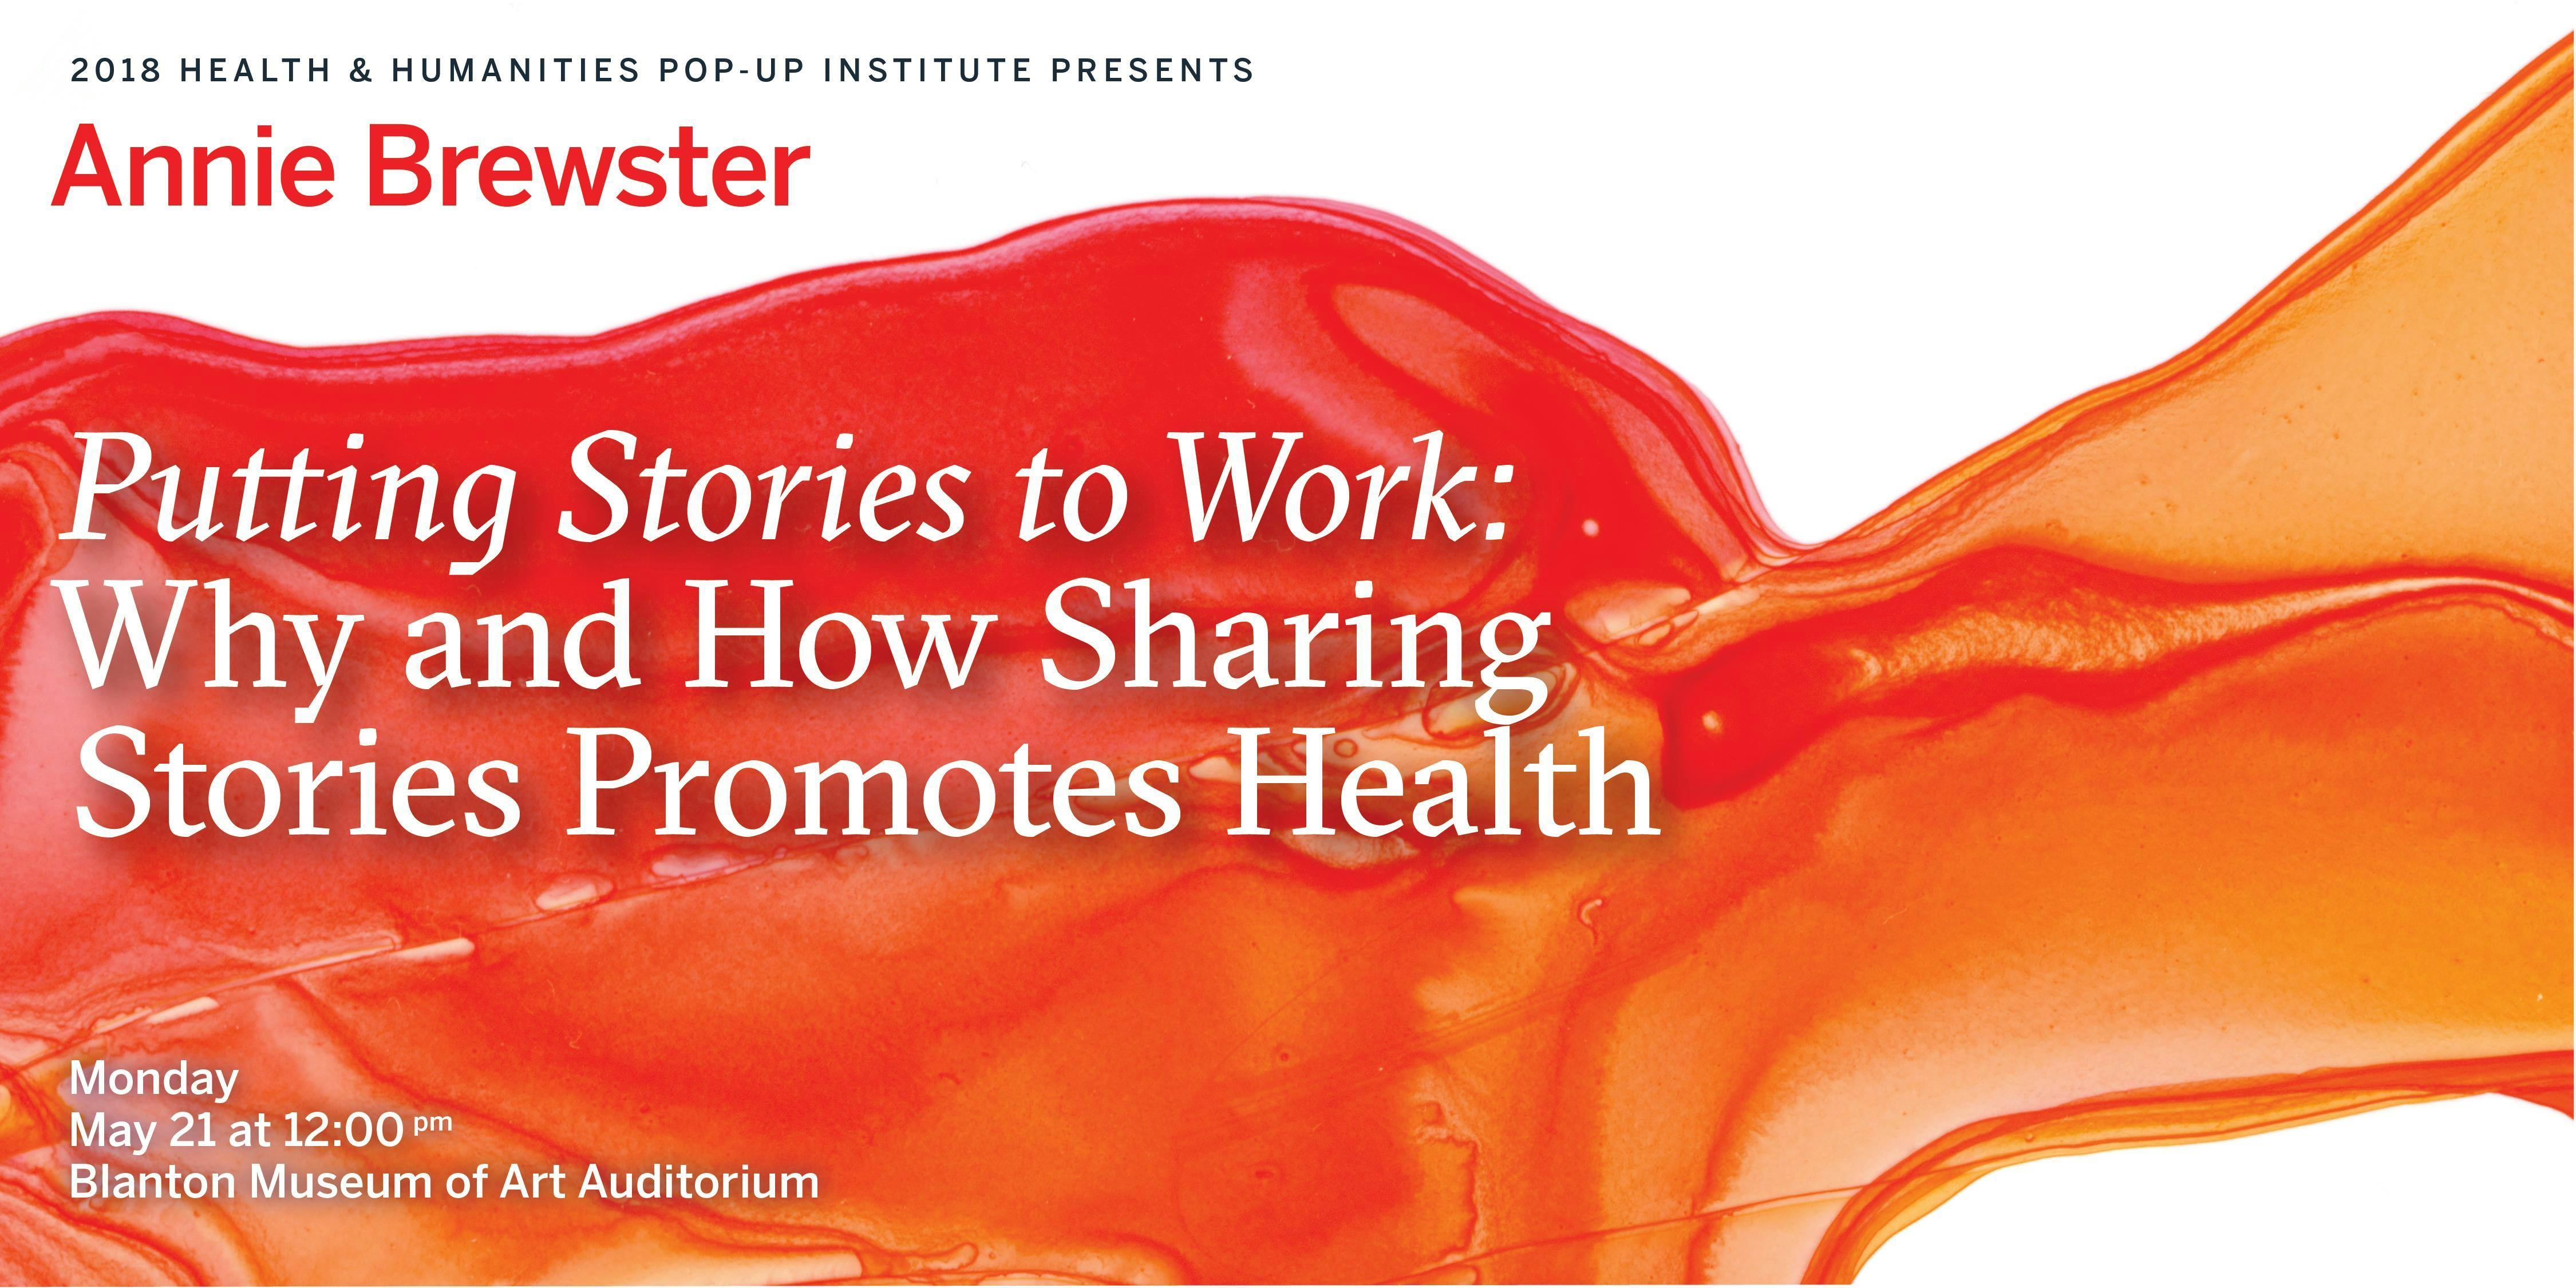 Annie Brewster, Putting Stories to Work: Why and How Sharing Stories Promotes Health